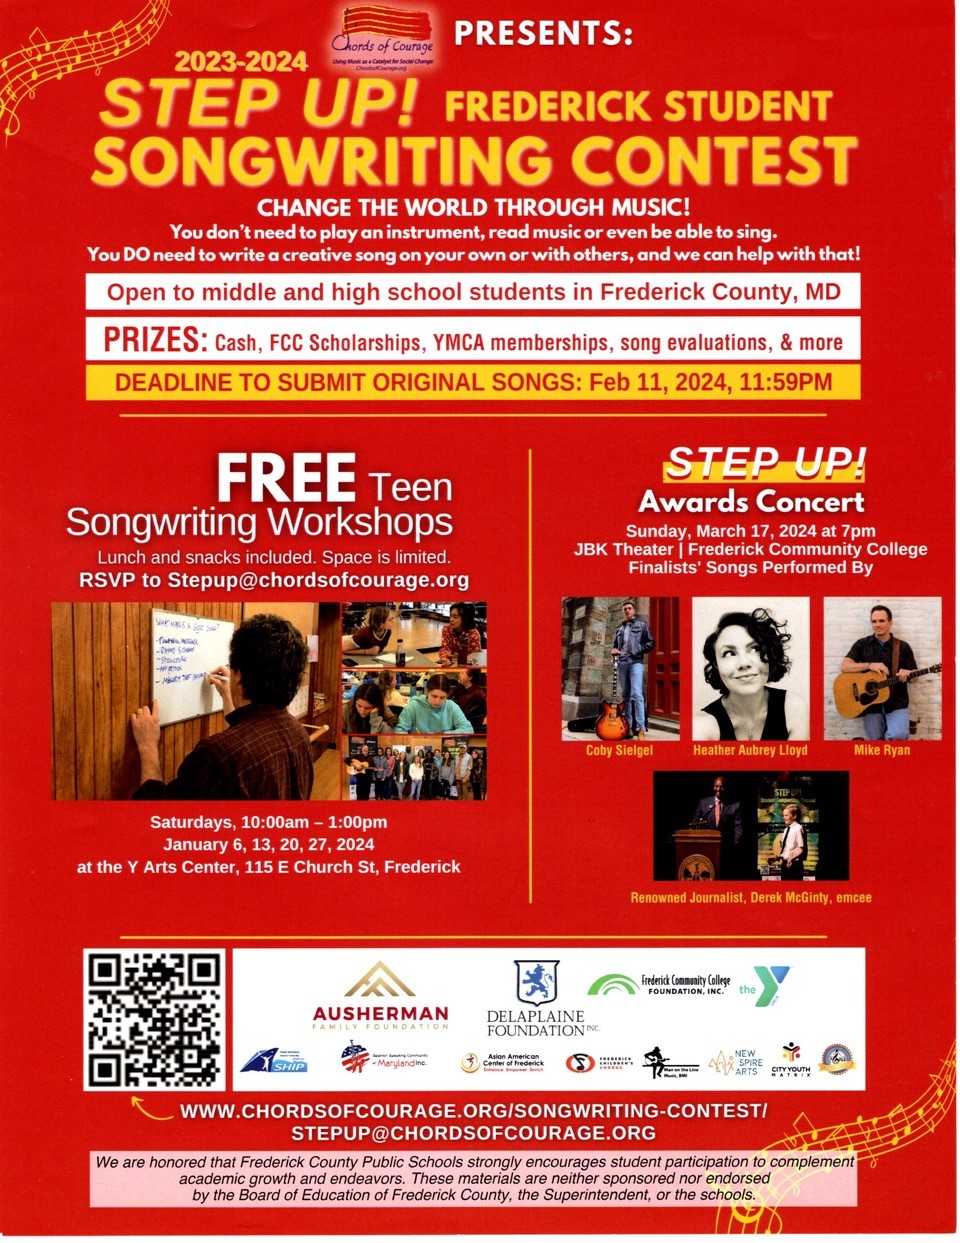 2024 STEP UP! Frederick Awards Concert for the STEP UP! Frederick Student Songwriting Contest on Mar 17, 19:00@JBK Theater at Frederick Community College, Frederick, MD - Buy tickets and Get information on chordsofcourage.org 